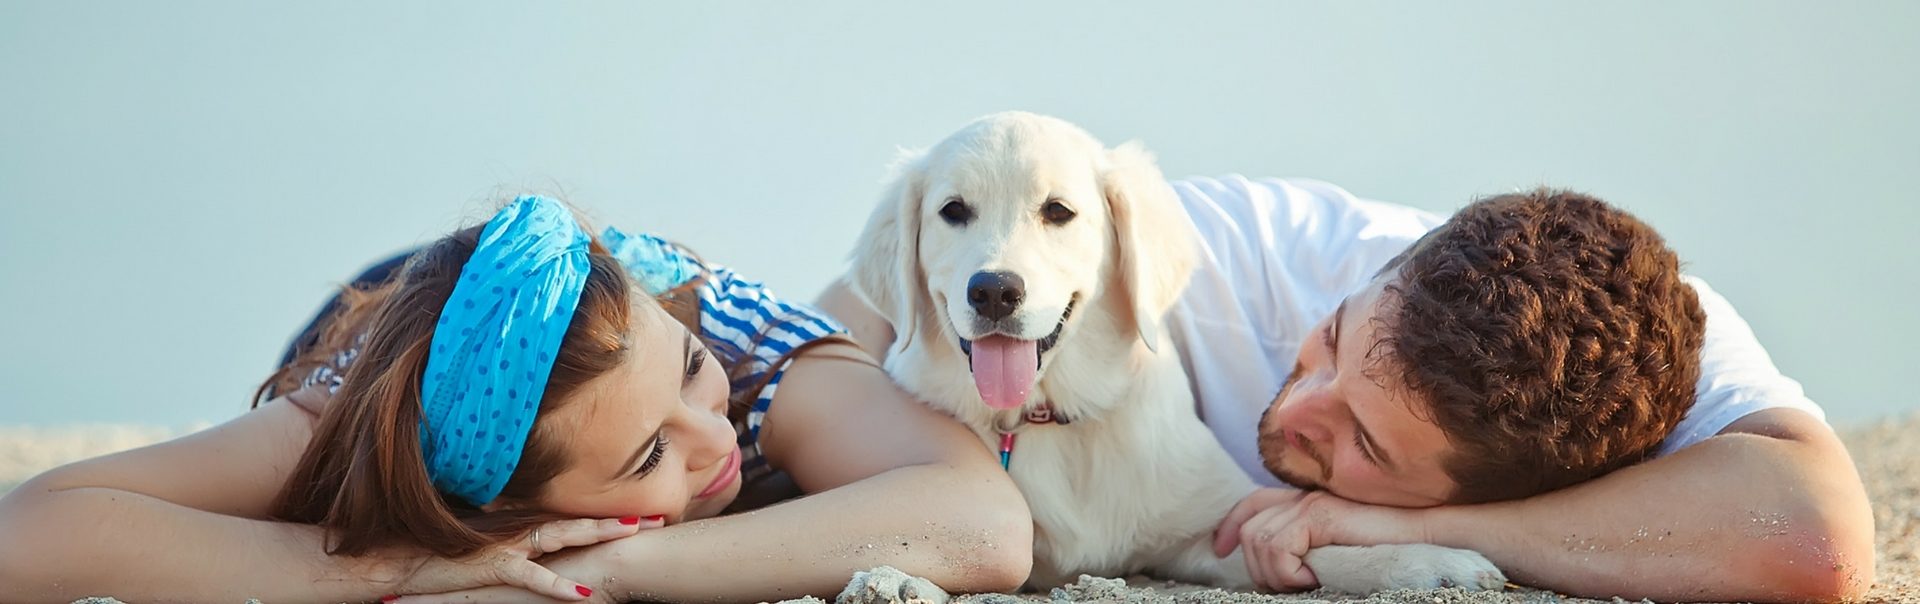 Two people and a dog lying on sand at the beach